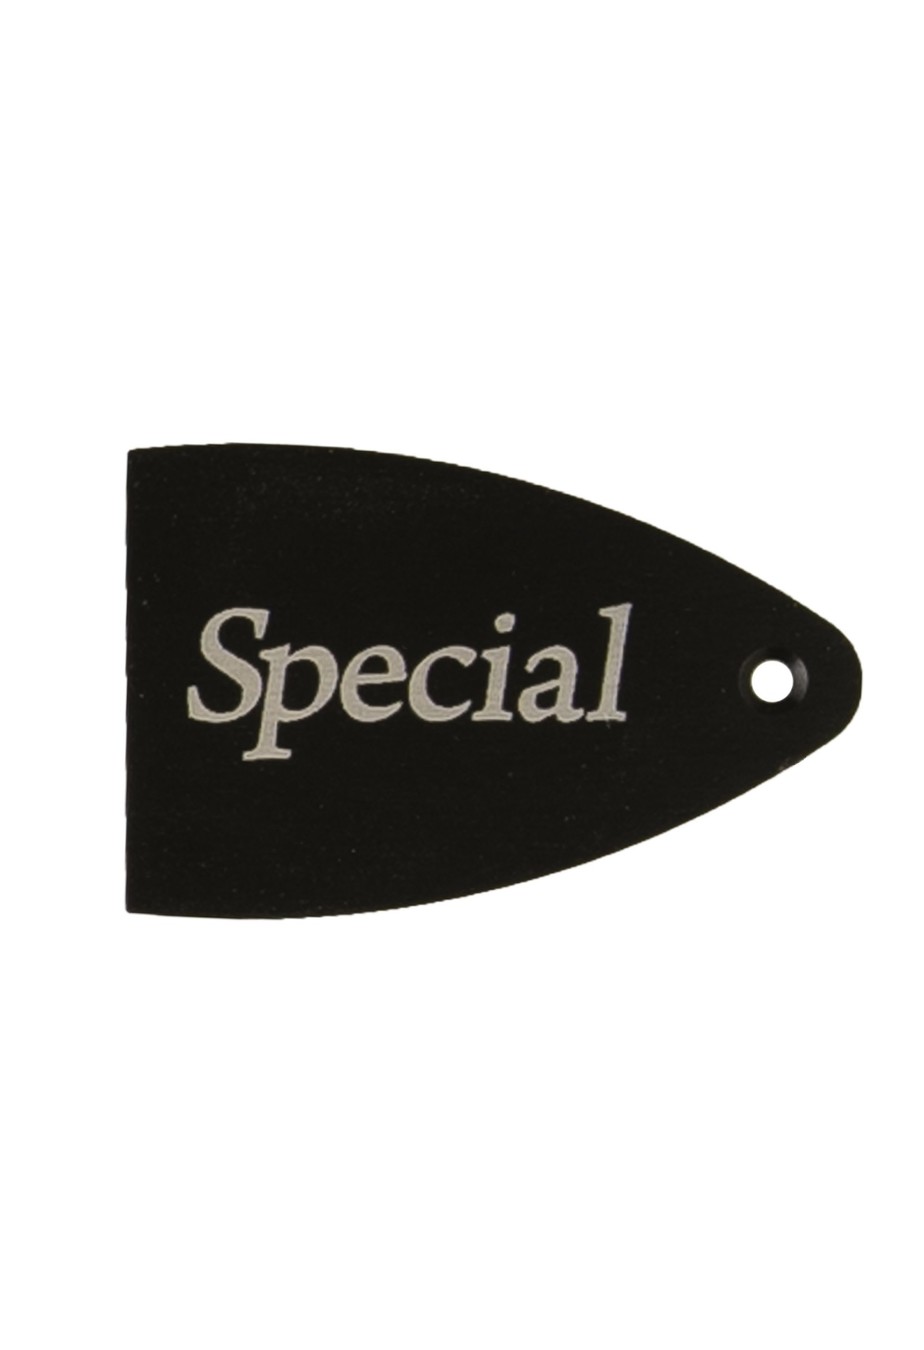 PRS Guitars Truss Rod Cover, Black Anodized Aluminum, Etched, Special